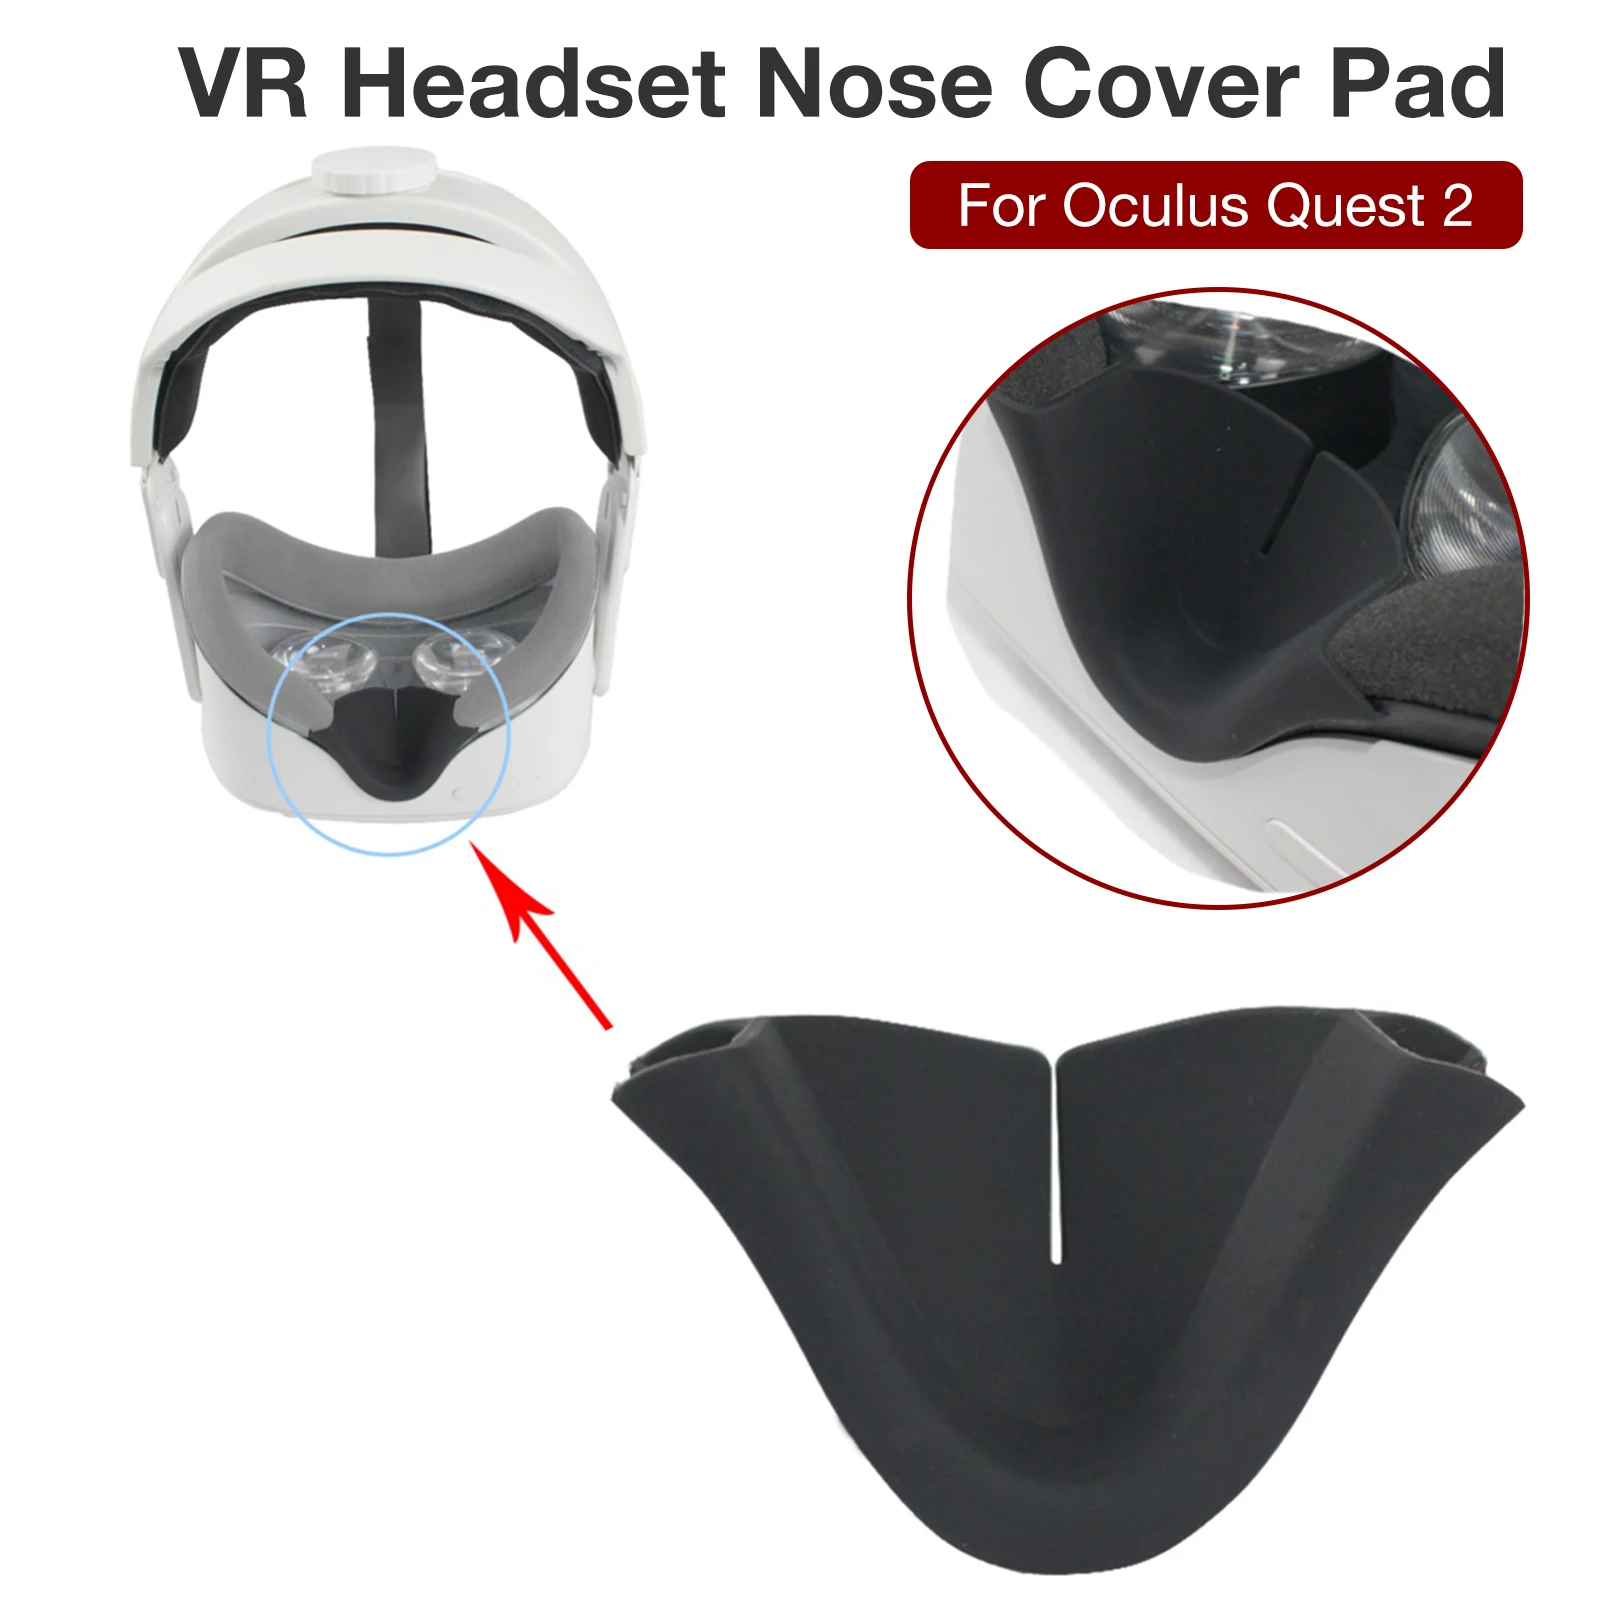 For Oculus Quest 2 Accessories VR Headset Nose Cover Pad Light Blocking Pad For Oculus Quest 2 VR Accessories